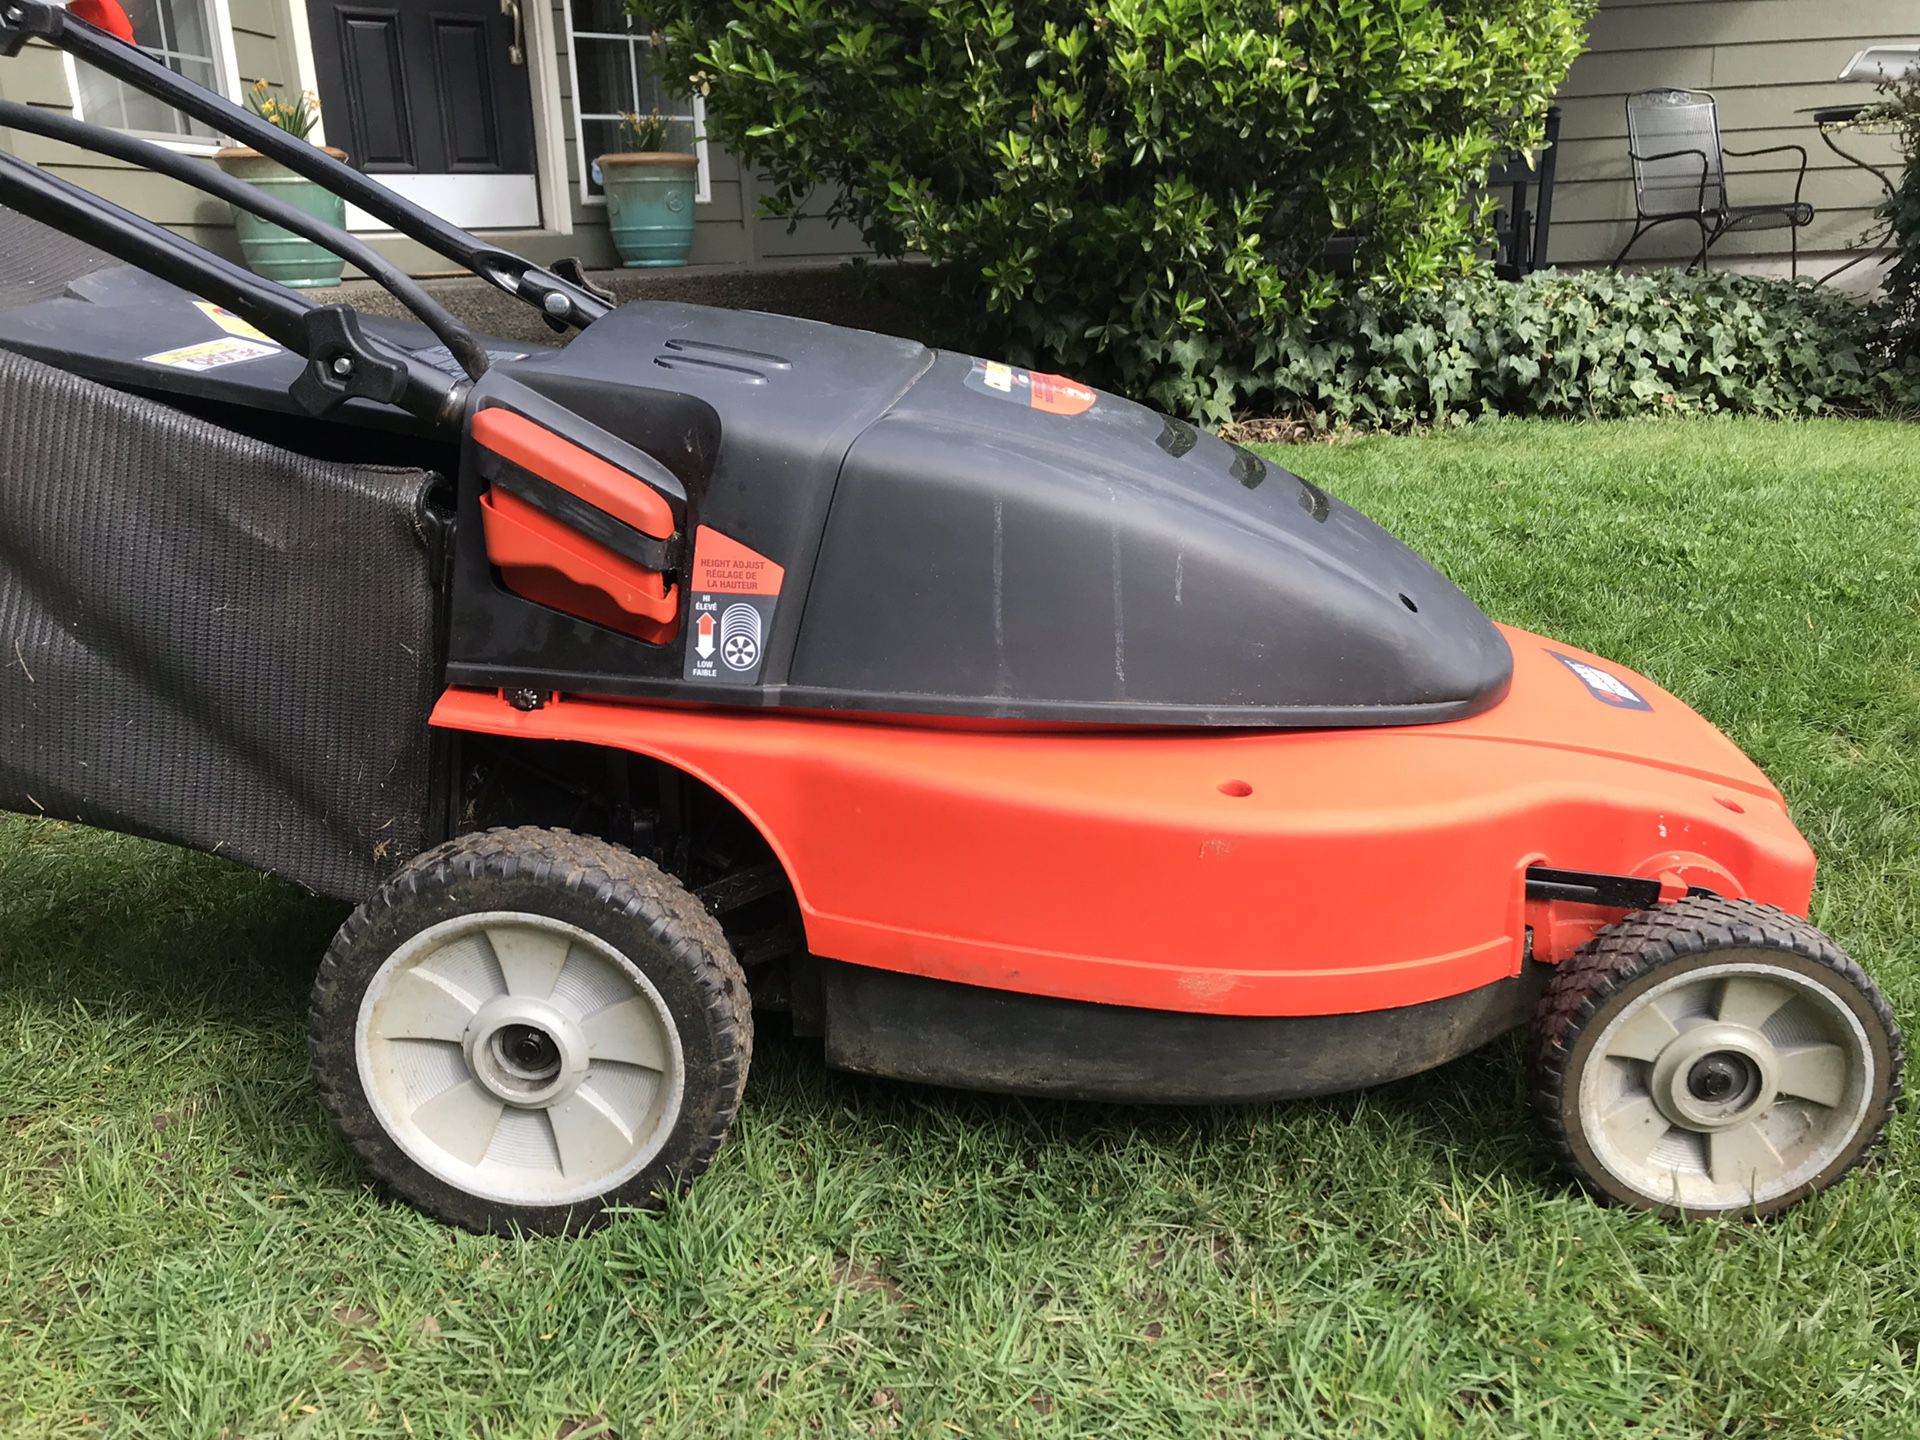 Black & Decker 24-Volt Cordless Electric Lawn Mower with Bag�-�$125�(FREE  DELIVERY!!!) for Sale in Salem, OR - OfferUp